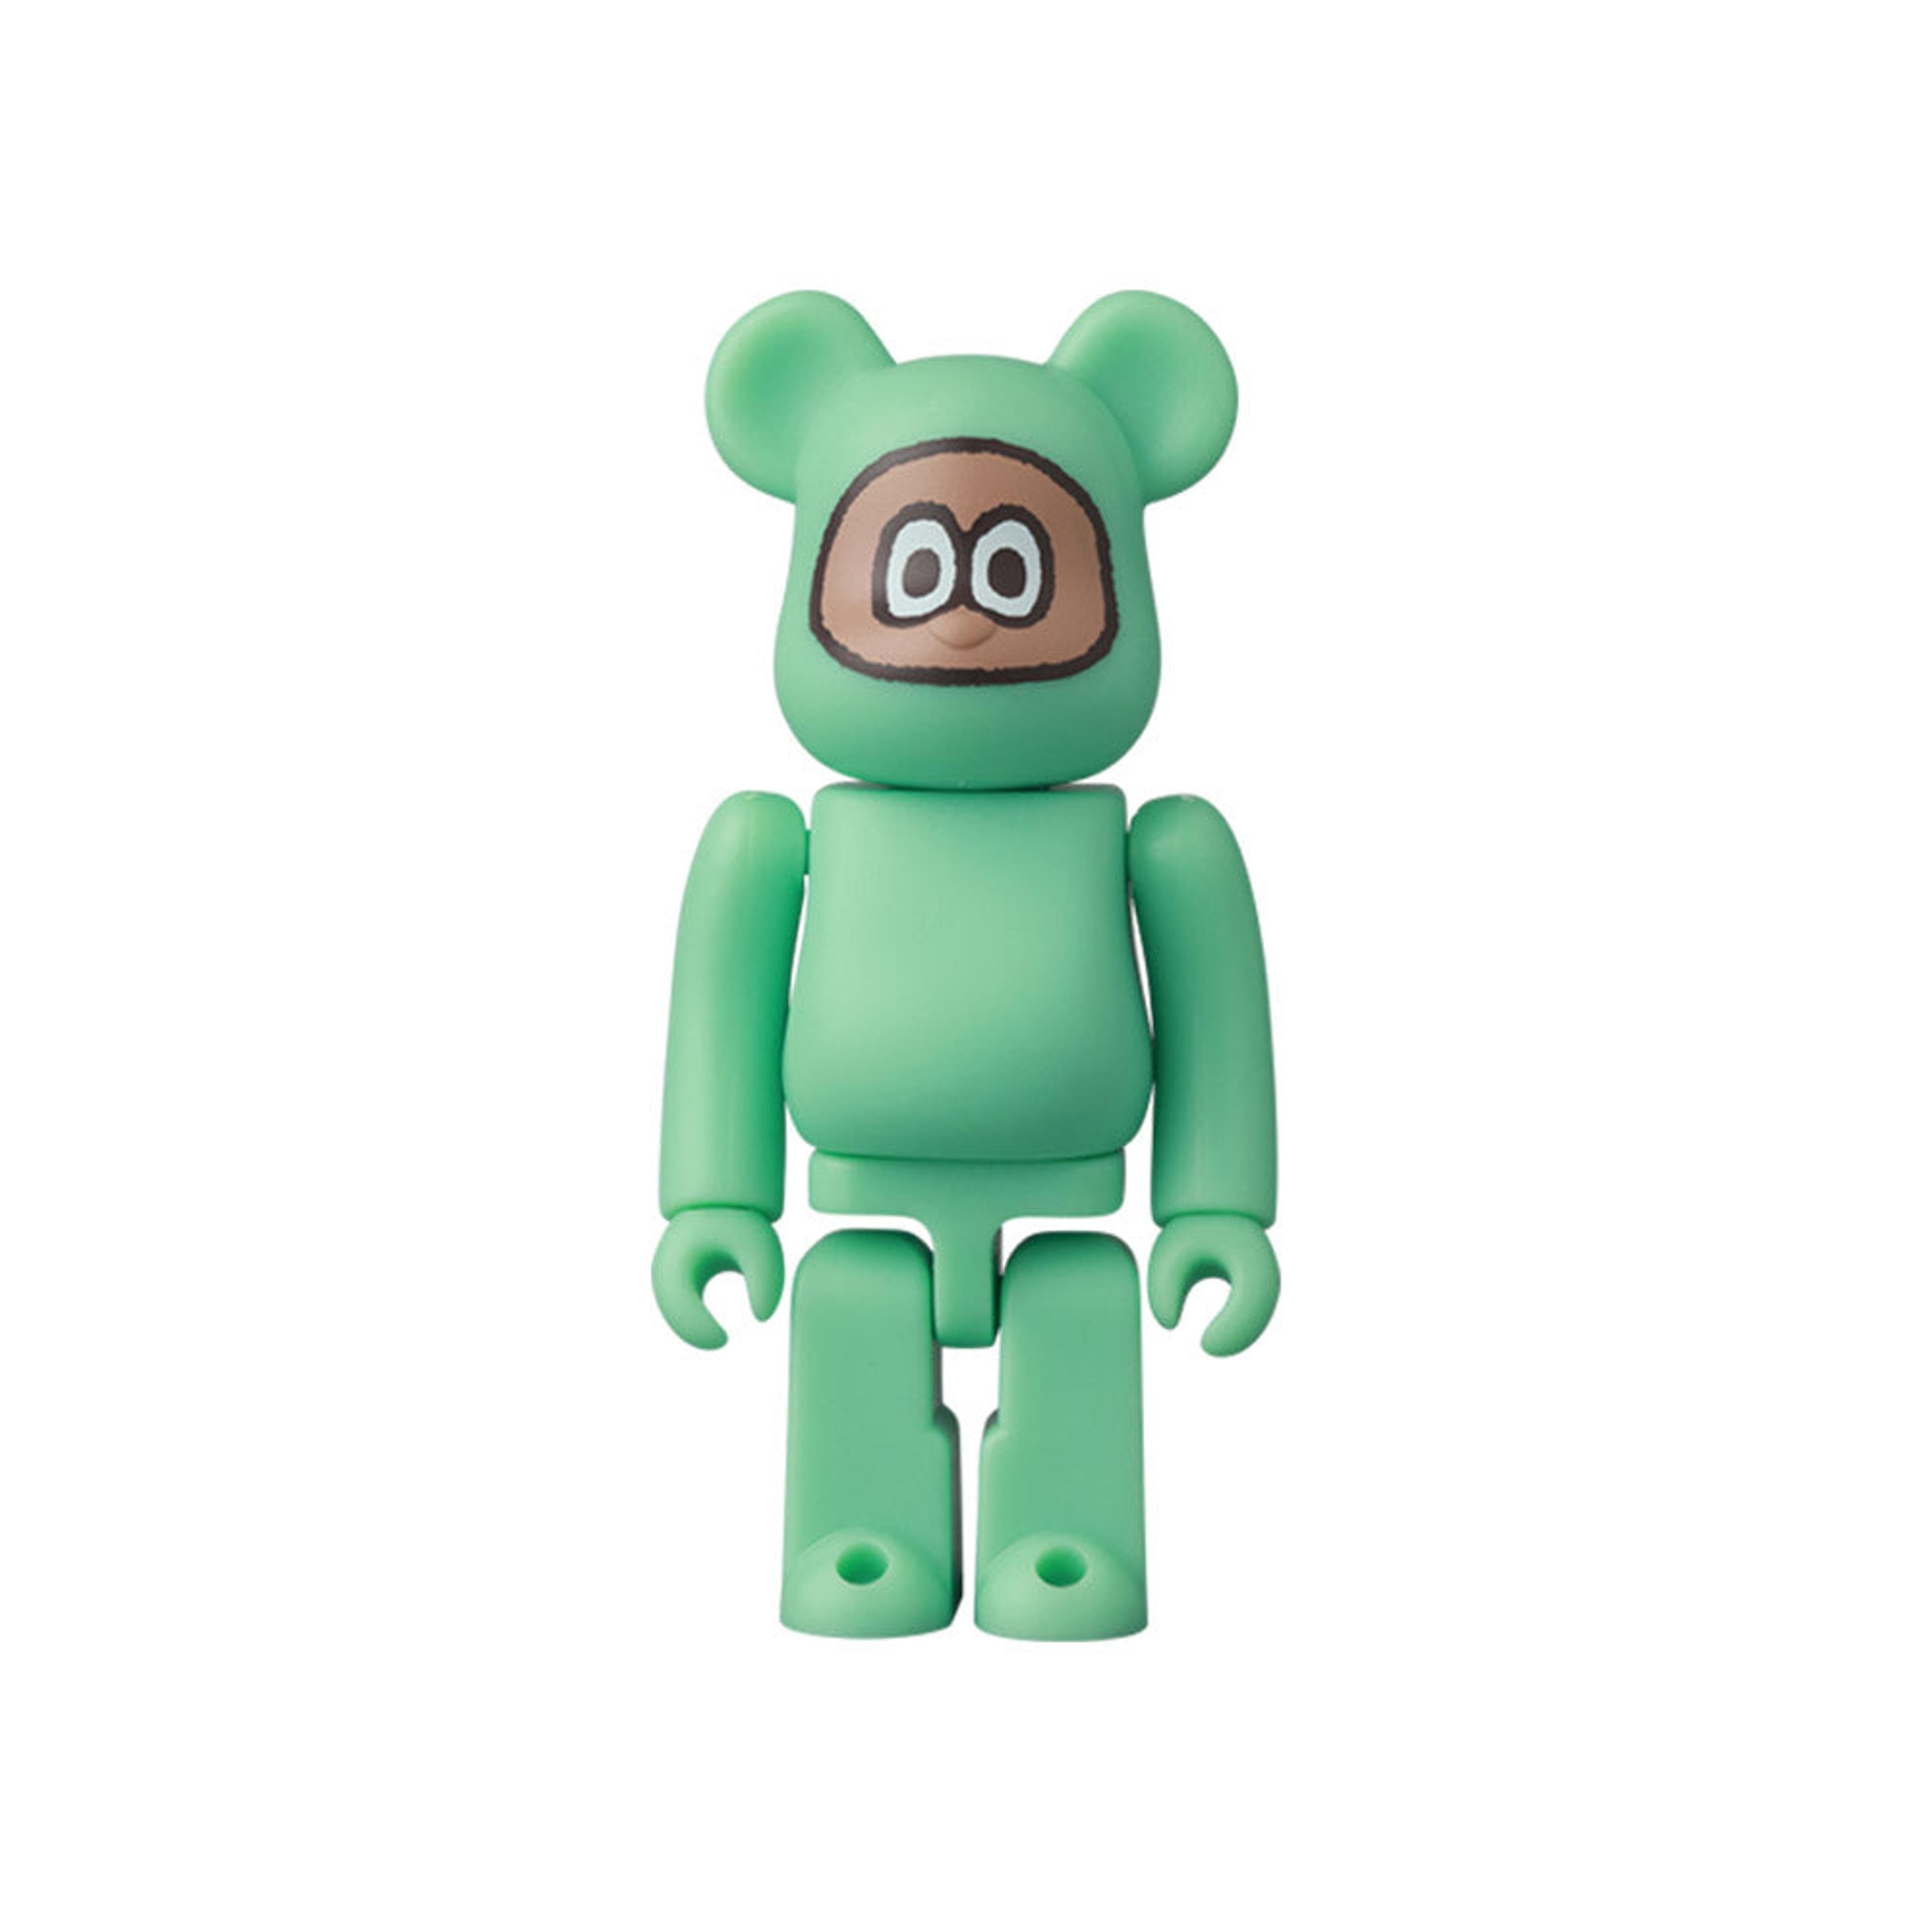 Alternate View 8 of Bearbrick Series 44 Display Case (24 Blind Boxes) by Medicom Toy